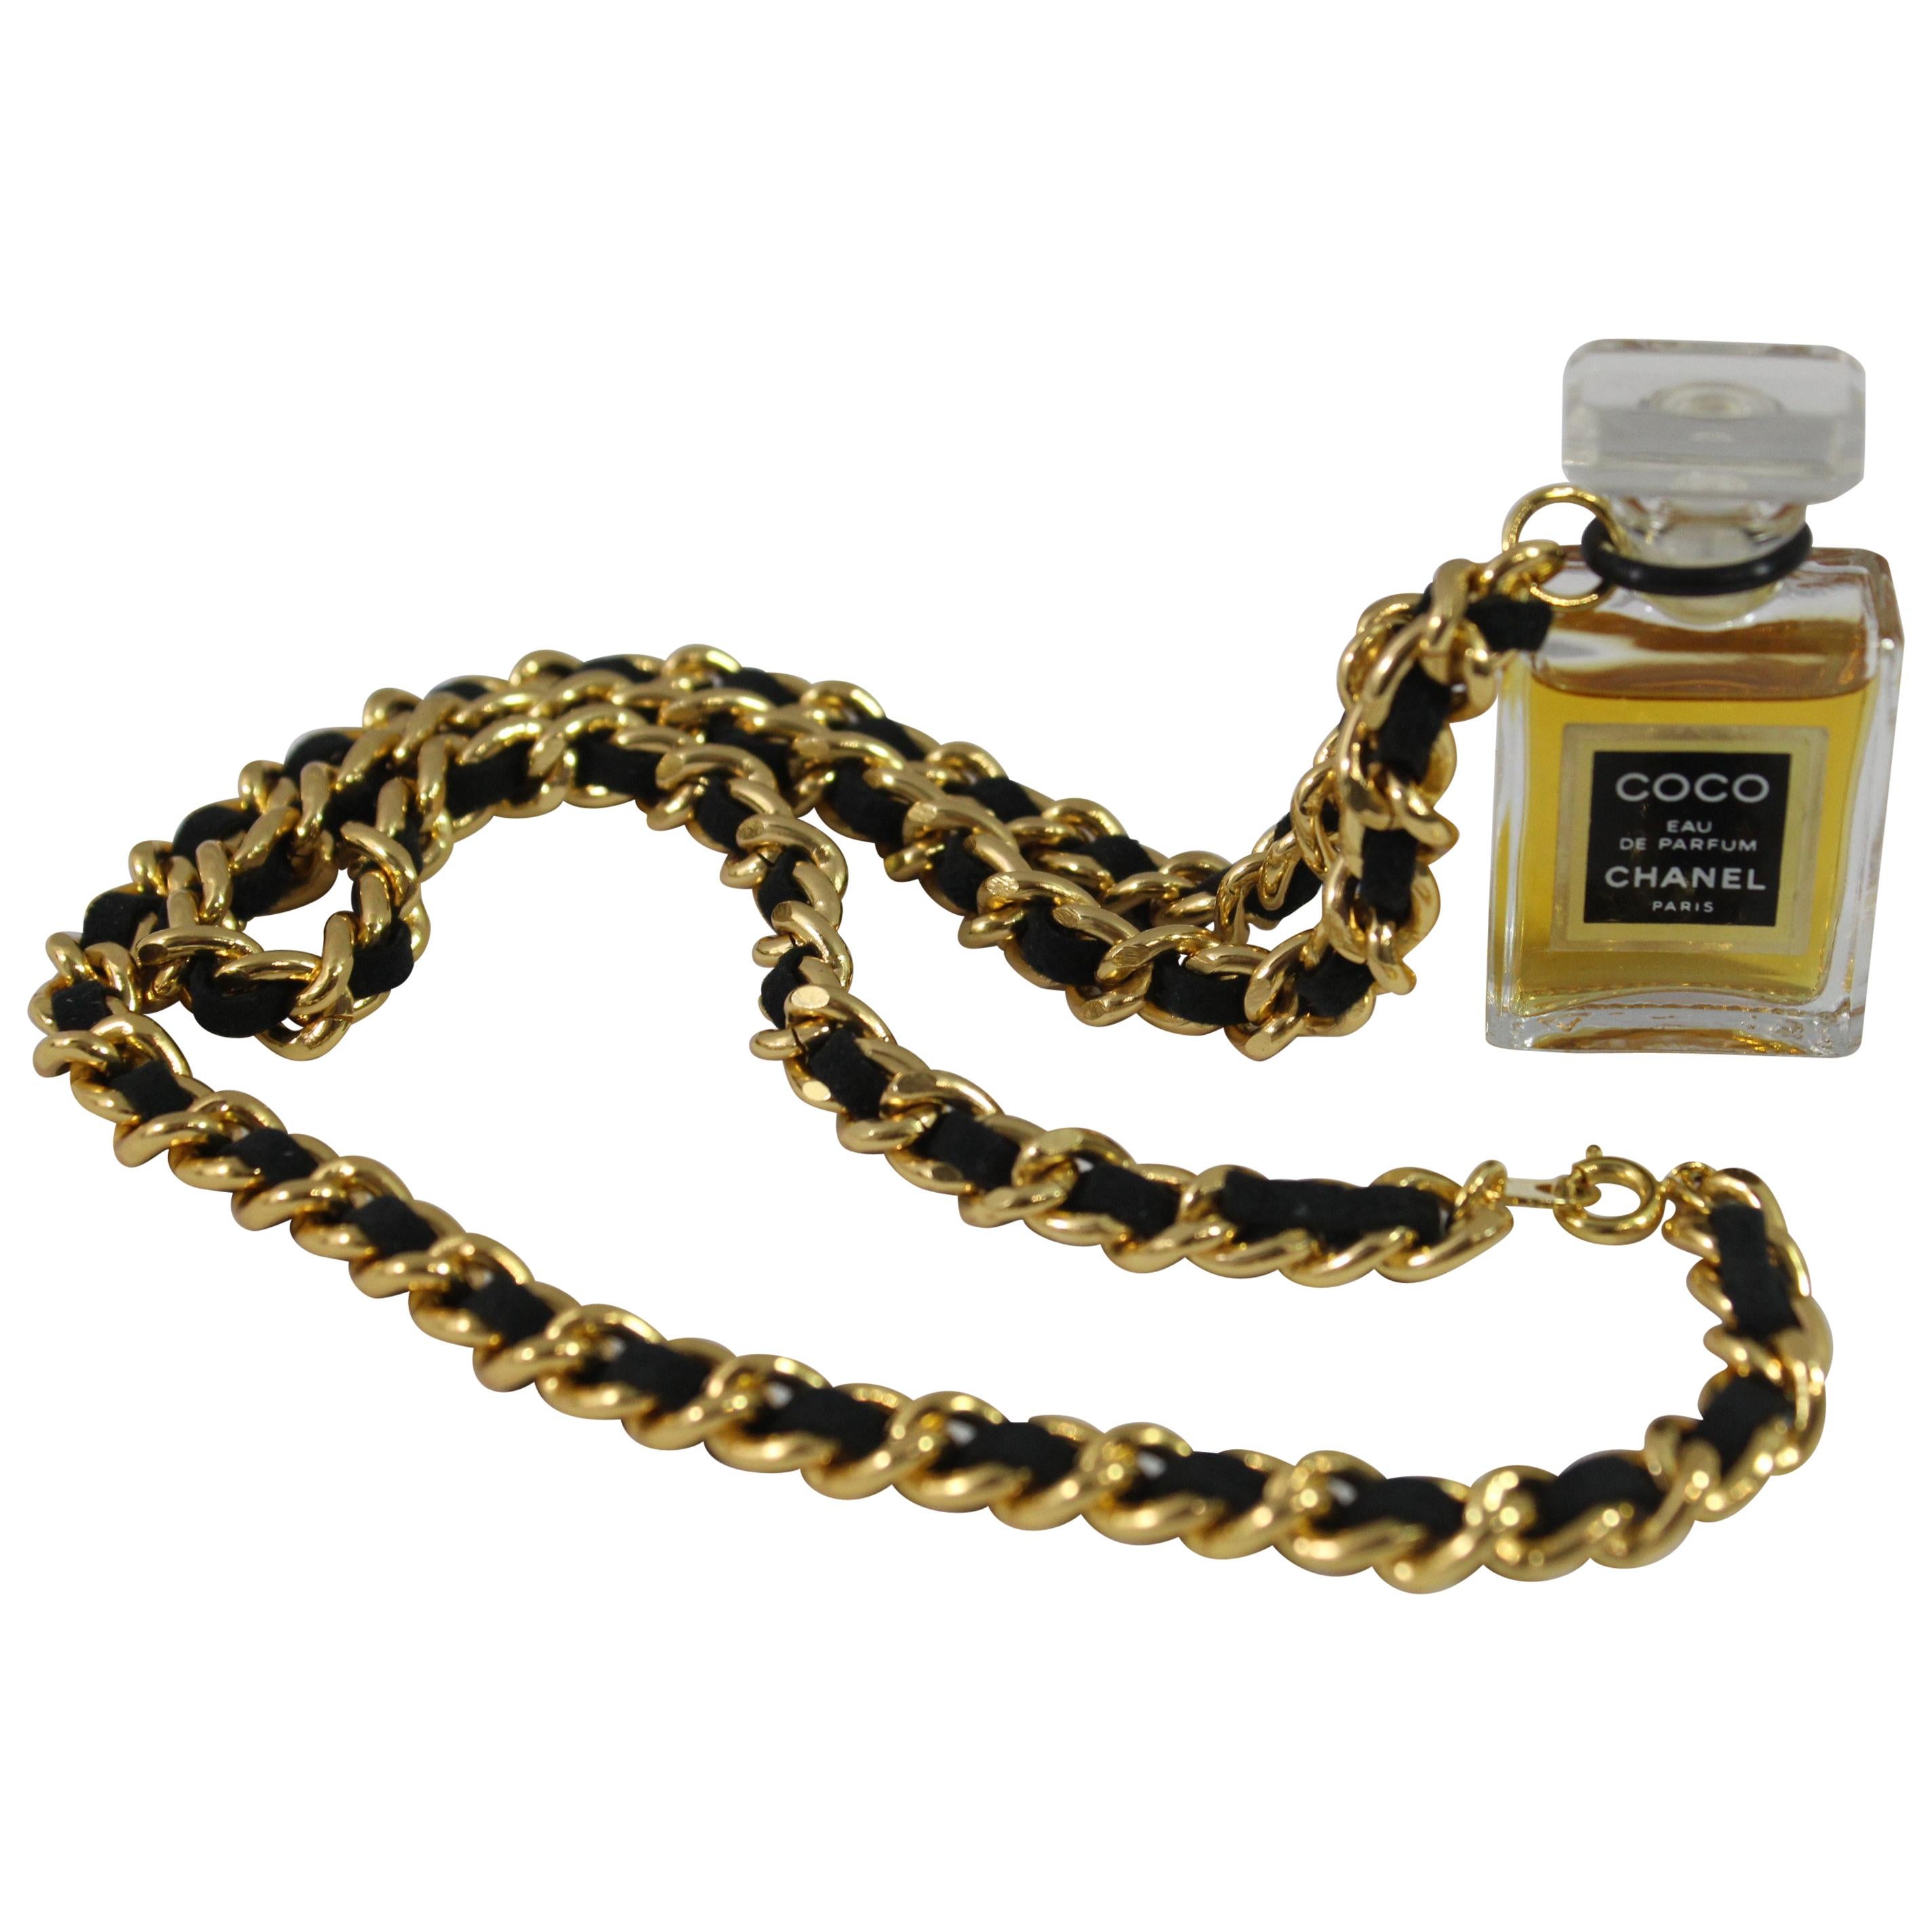 Chanel Vintage Necklace with Chanel parfum Bottle. 